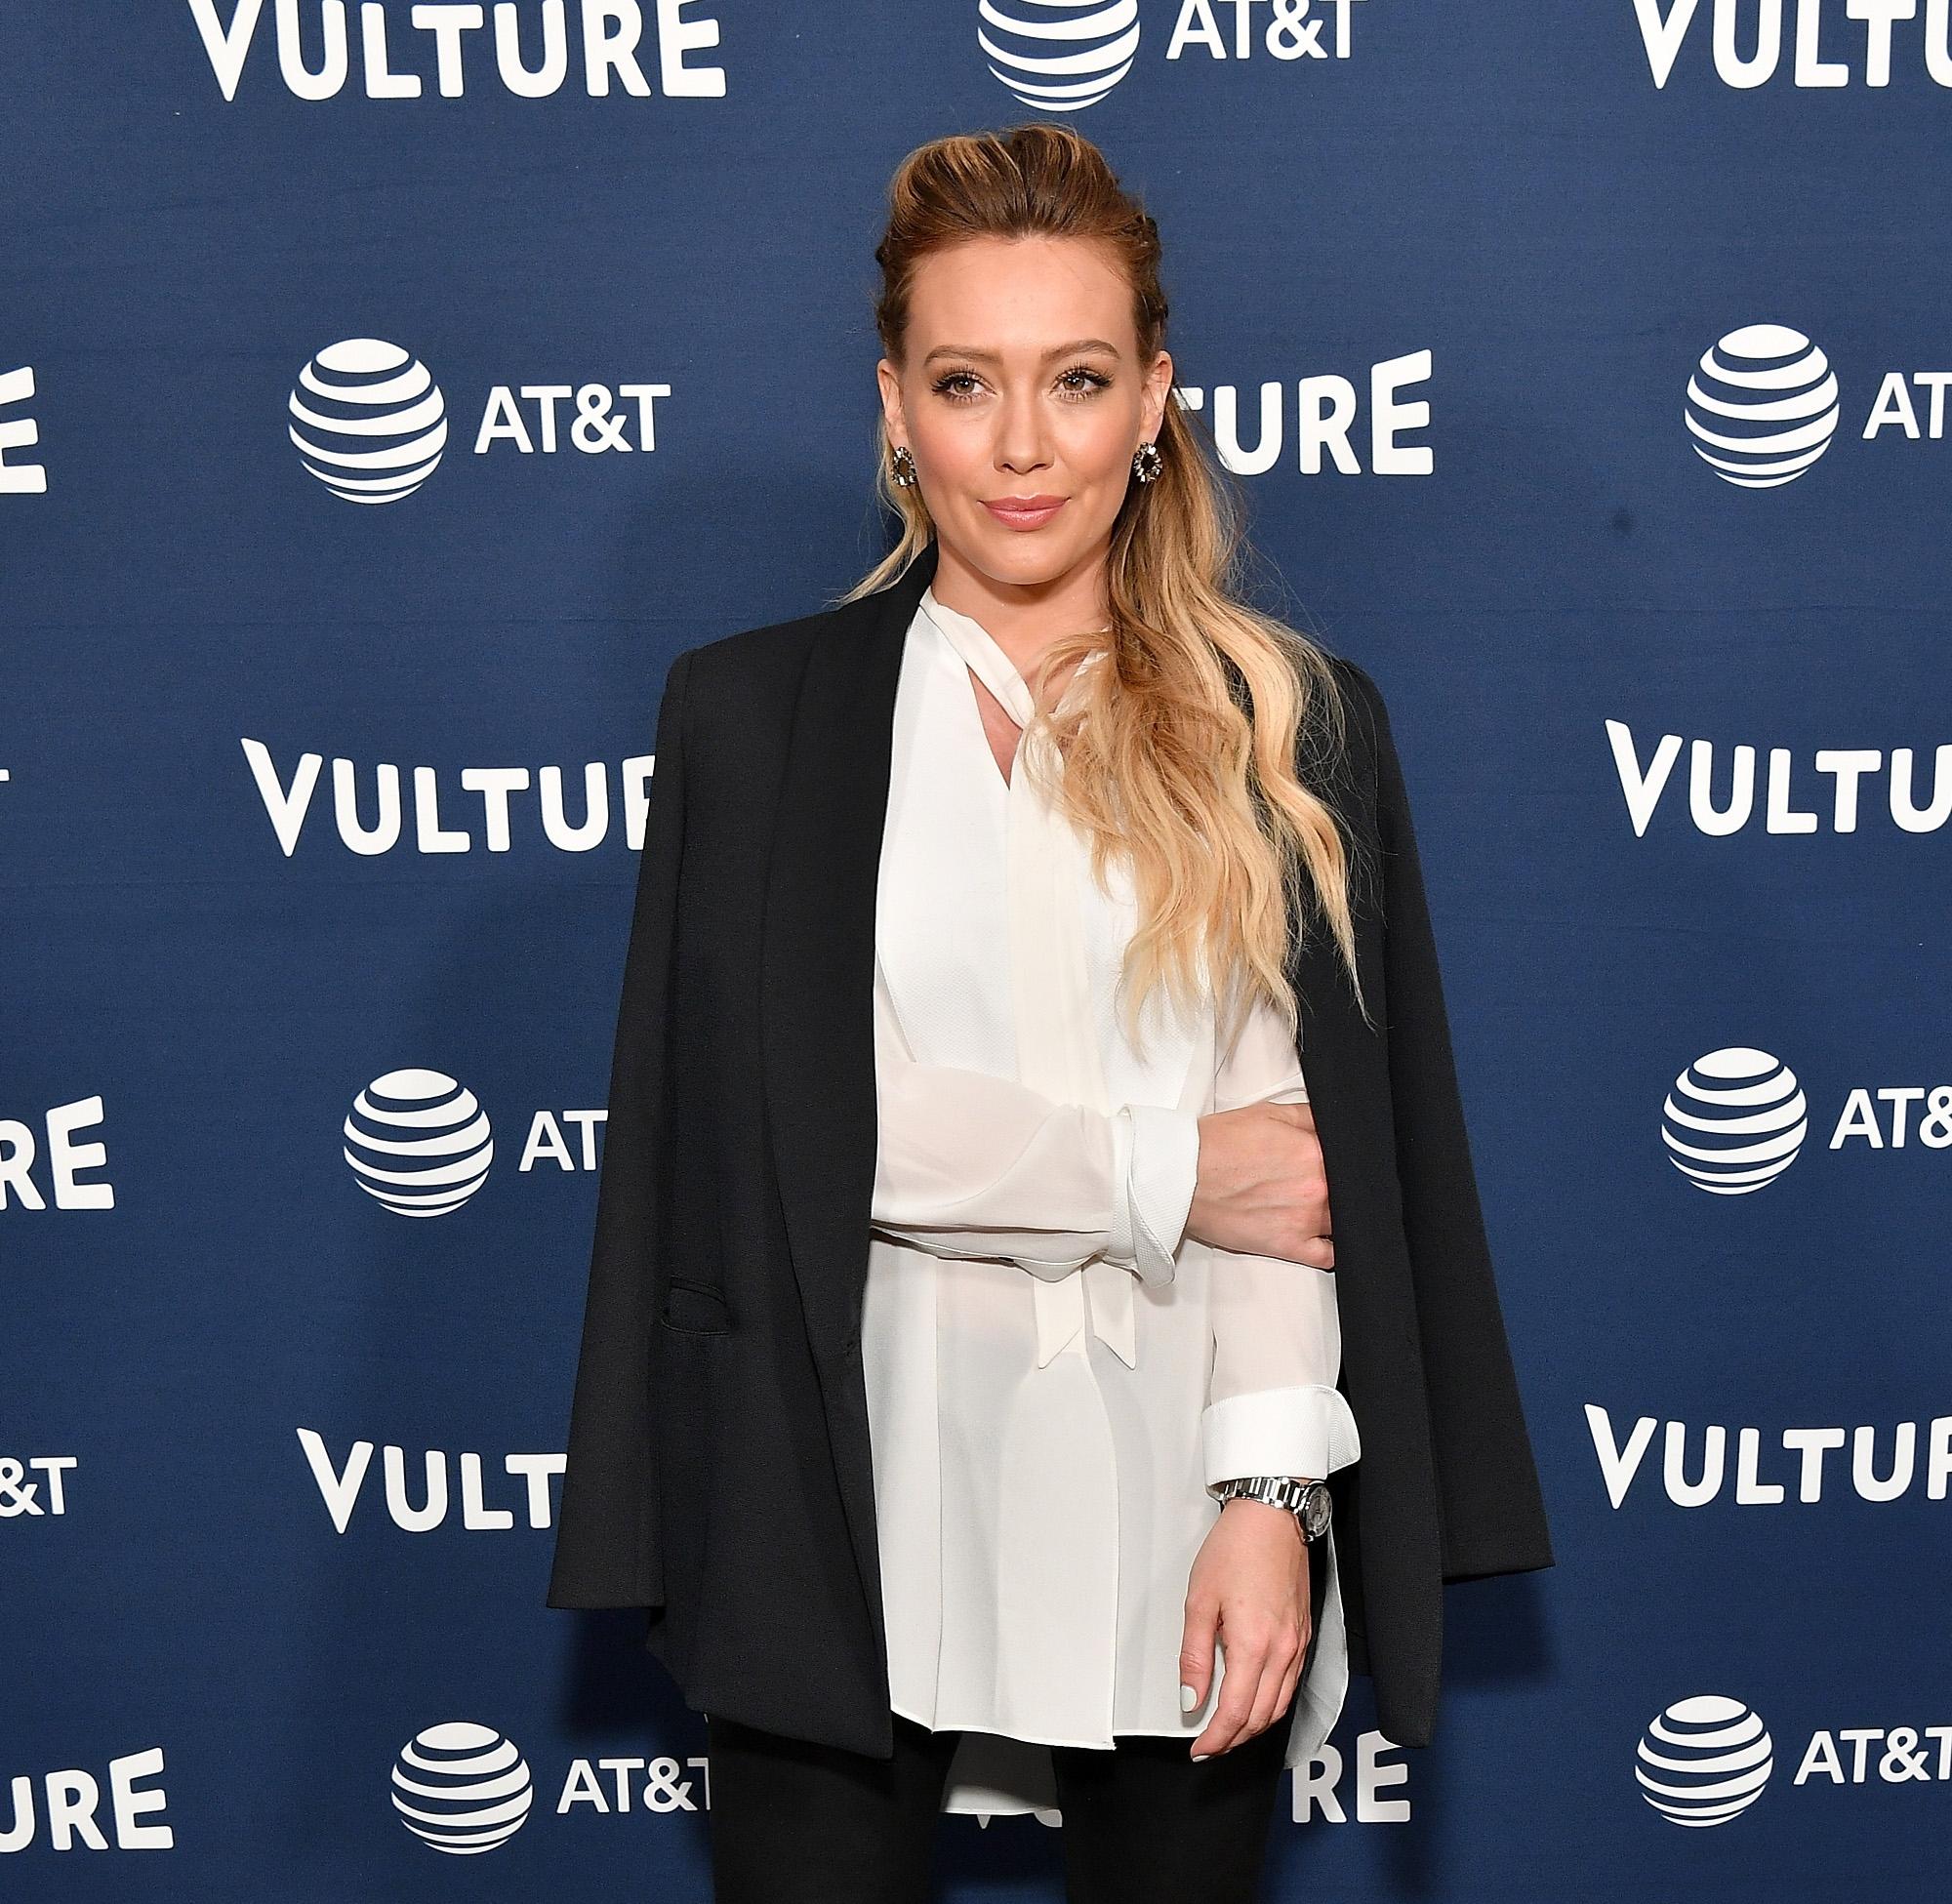 Collection 92+ Images was hilary duff pregnant in season 5 of younger Full HD, 2k, 4k